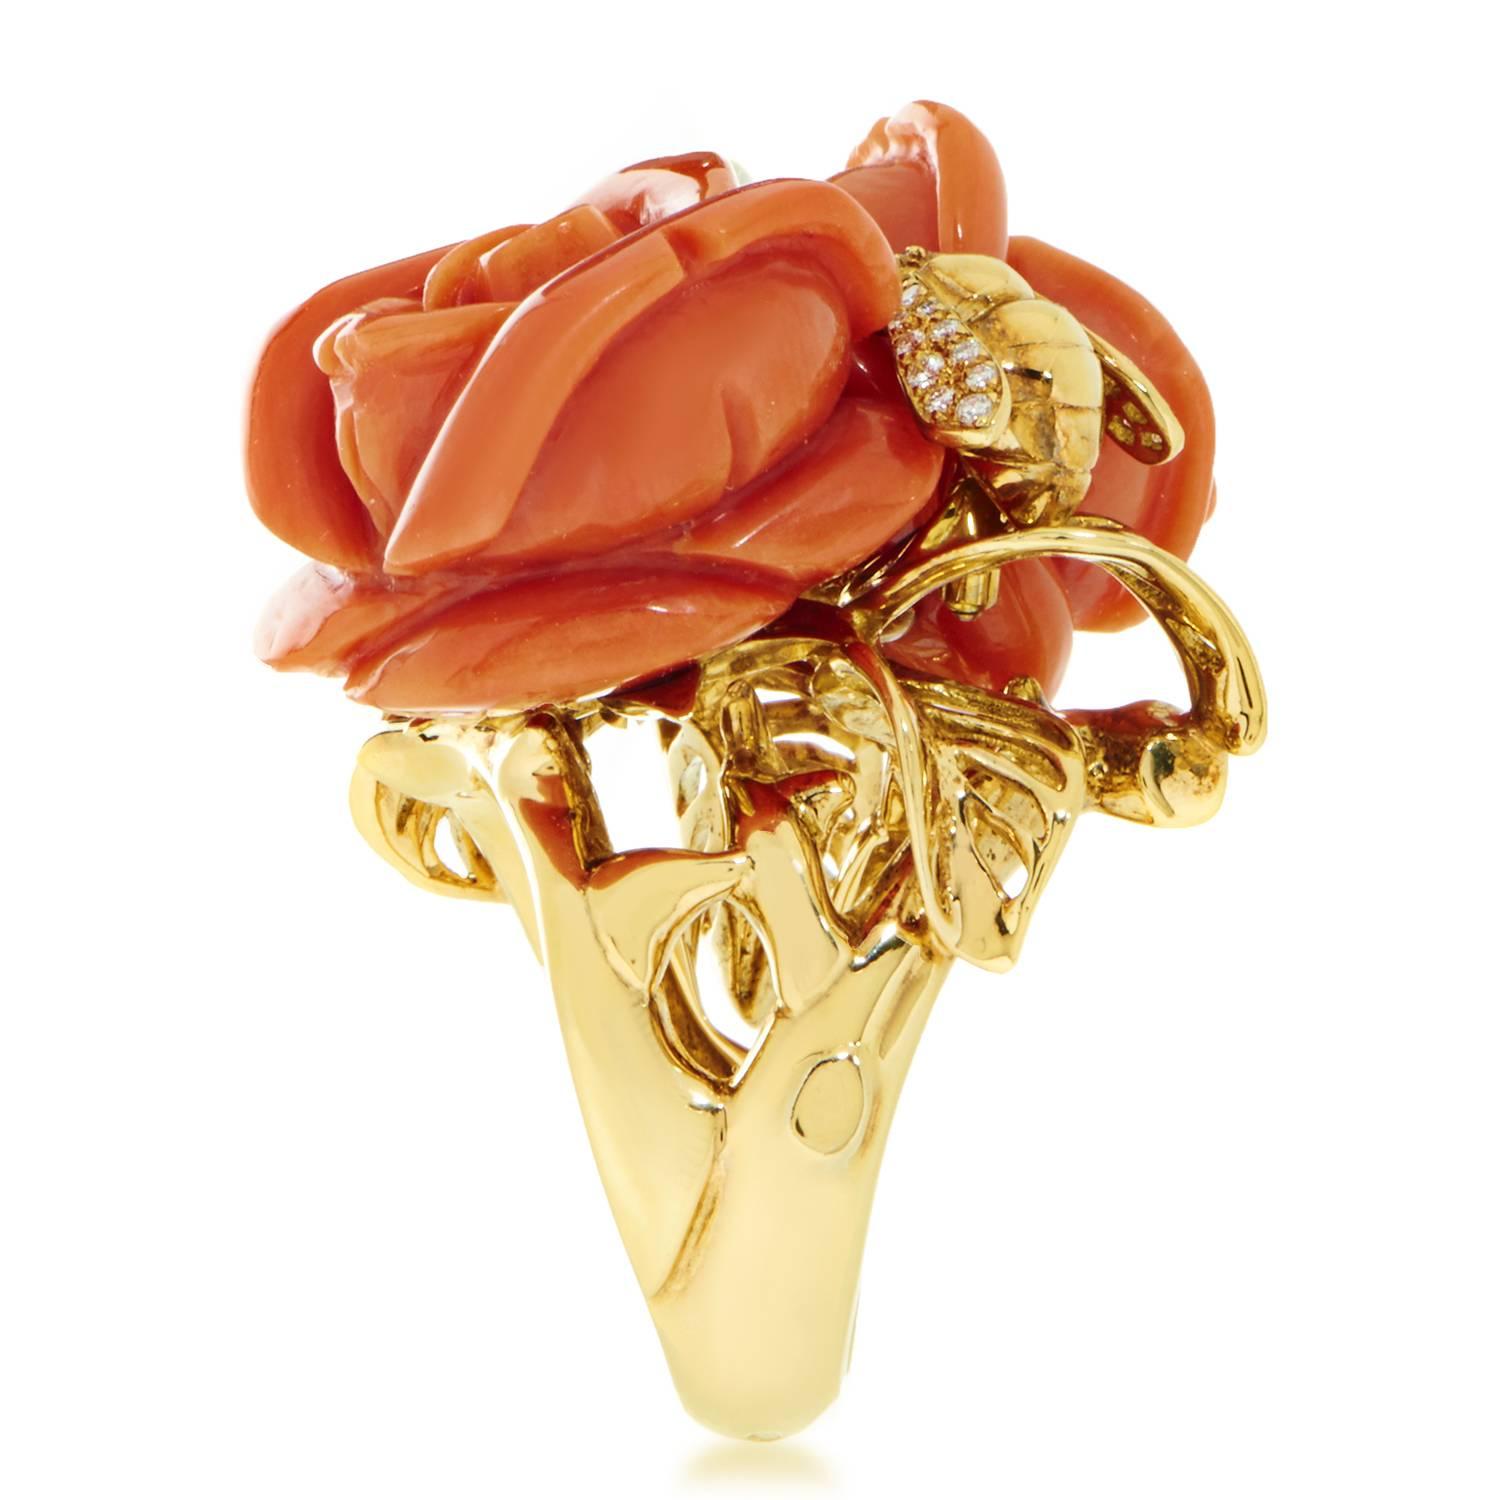 Employing the enchanting coral stones and sublime expertise to create majestically realistic depictions of spellbinding roses upon intricately ornamented 18K yellow gold, Dior present this extraordinary ring from the Rose Dior Pré Catelan